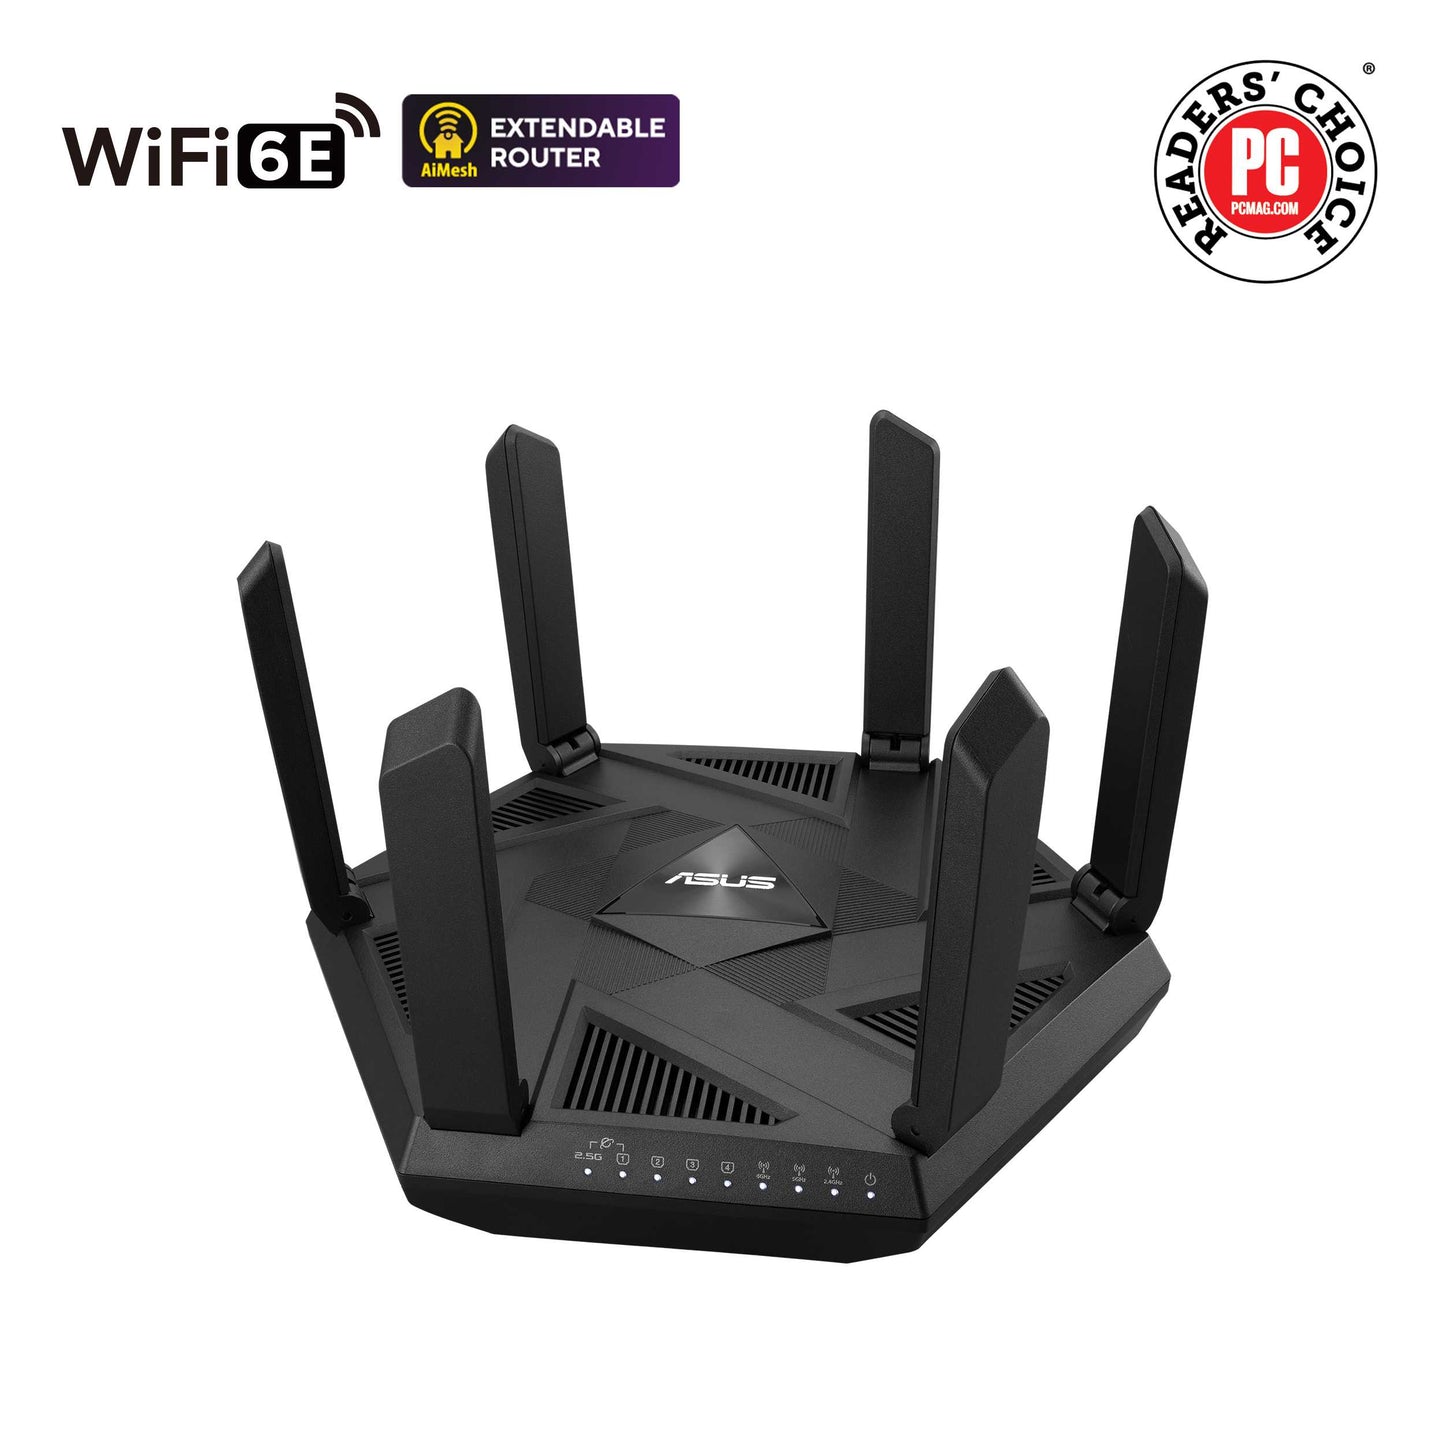 ASUS RT-AXE7800 Tri-band WiFi 6E (802.11ax) Router, New 6GHz Band, ASUS Safe Browsing, Enhanced Network Security with AiProtection Pro and Instant Guard Sharable Secure VPN, Free Parental Controls, 2.5G Port, Link Aggregation